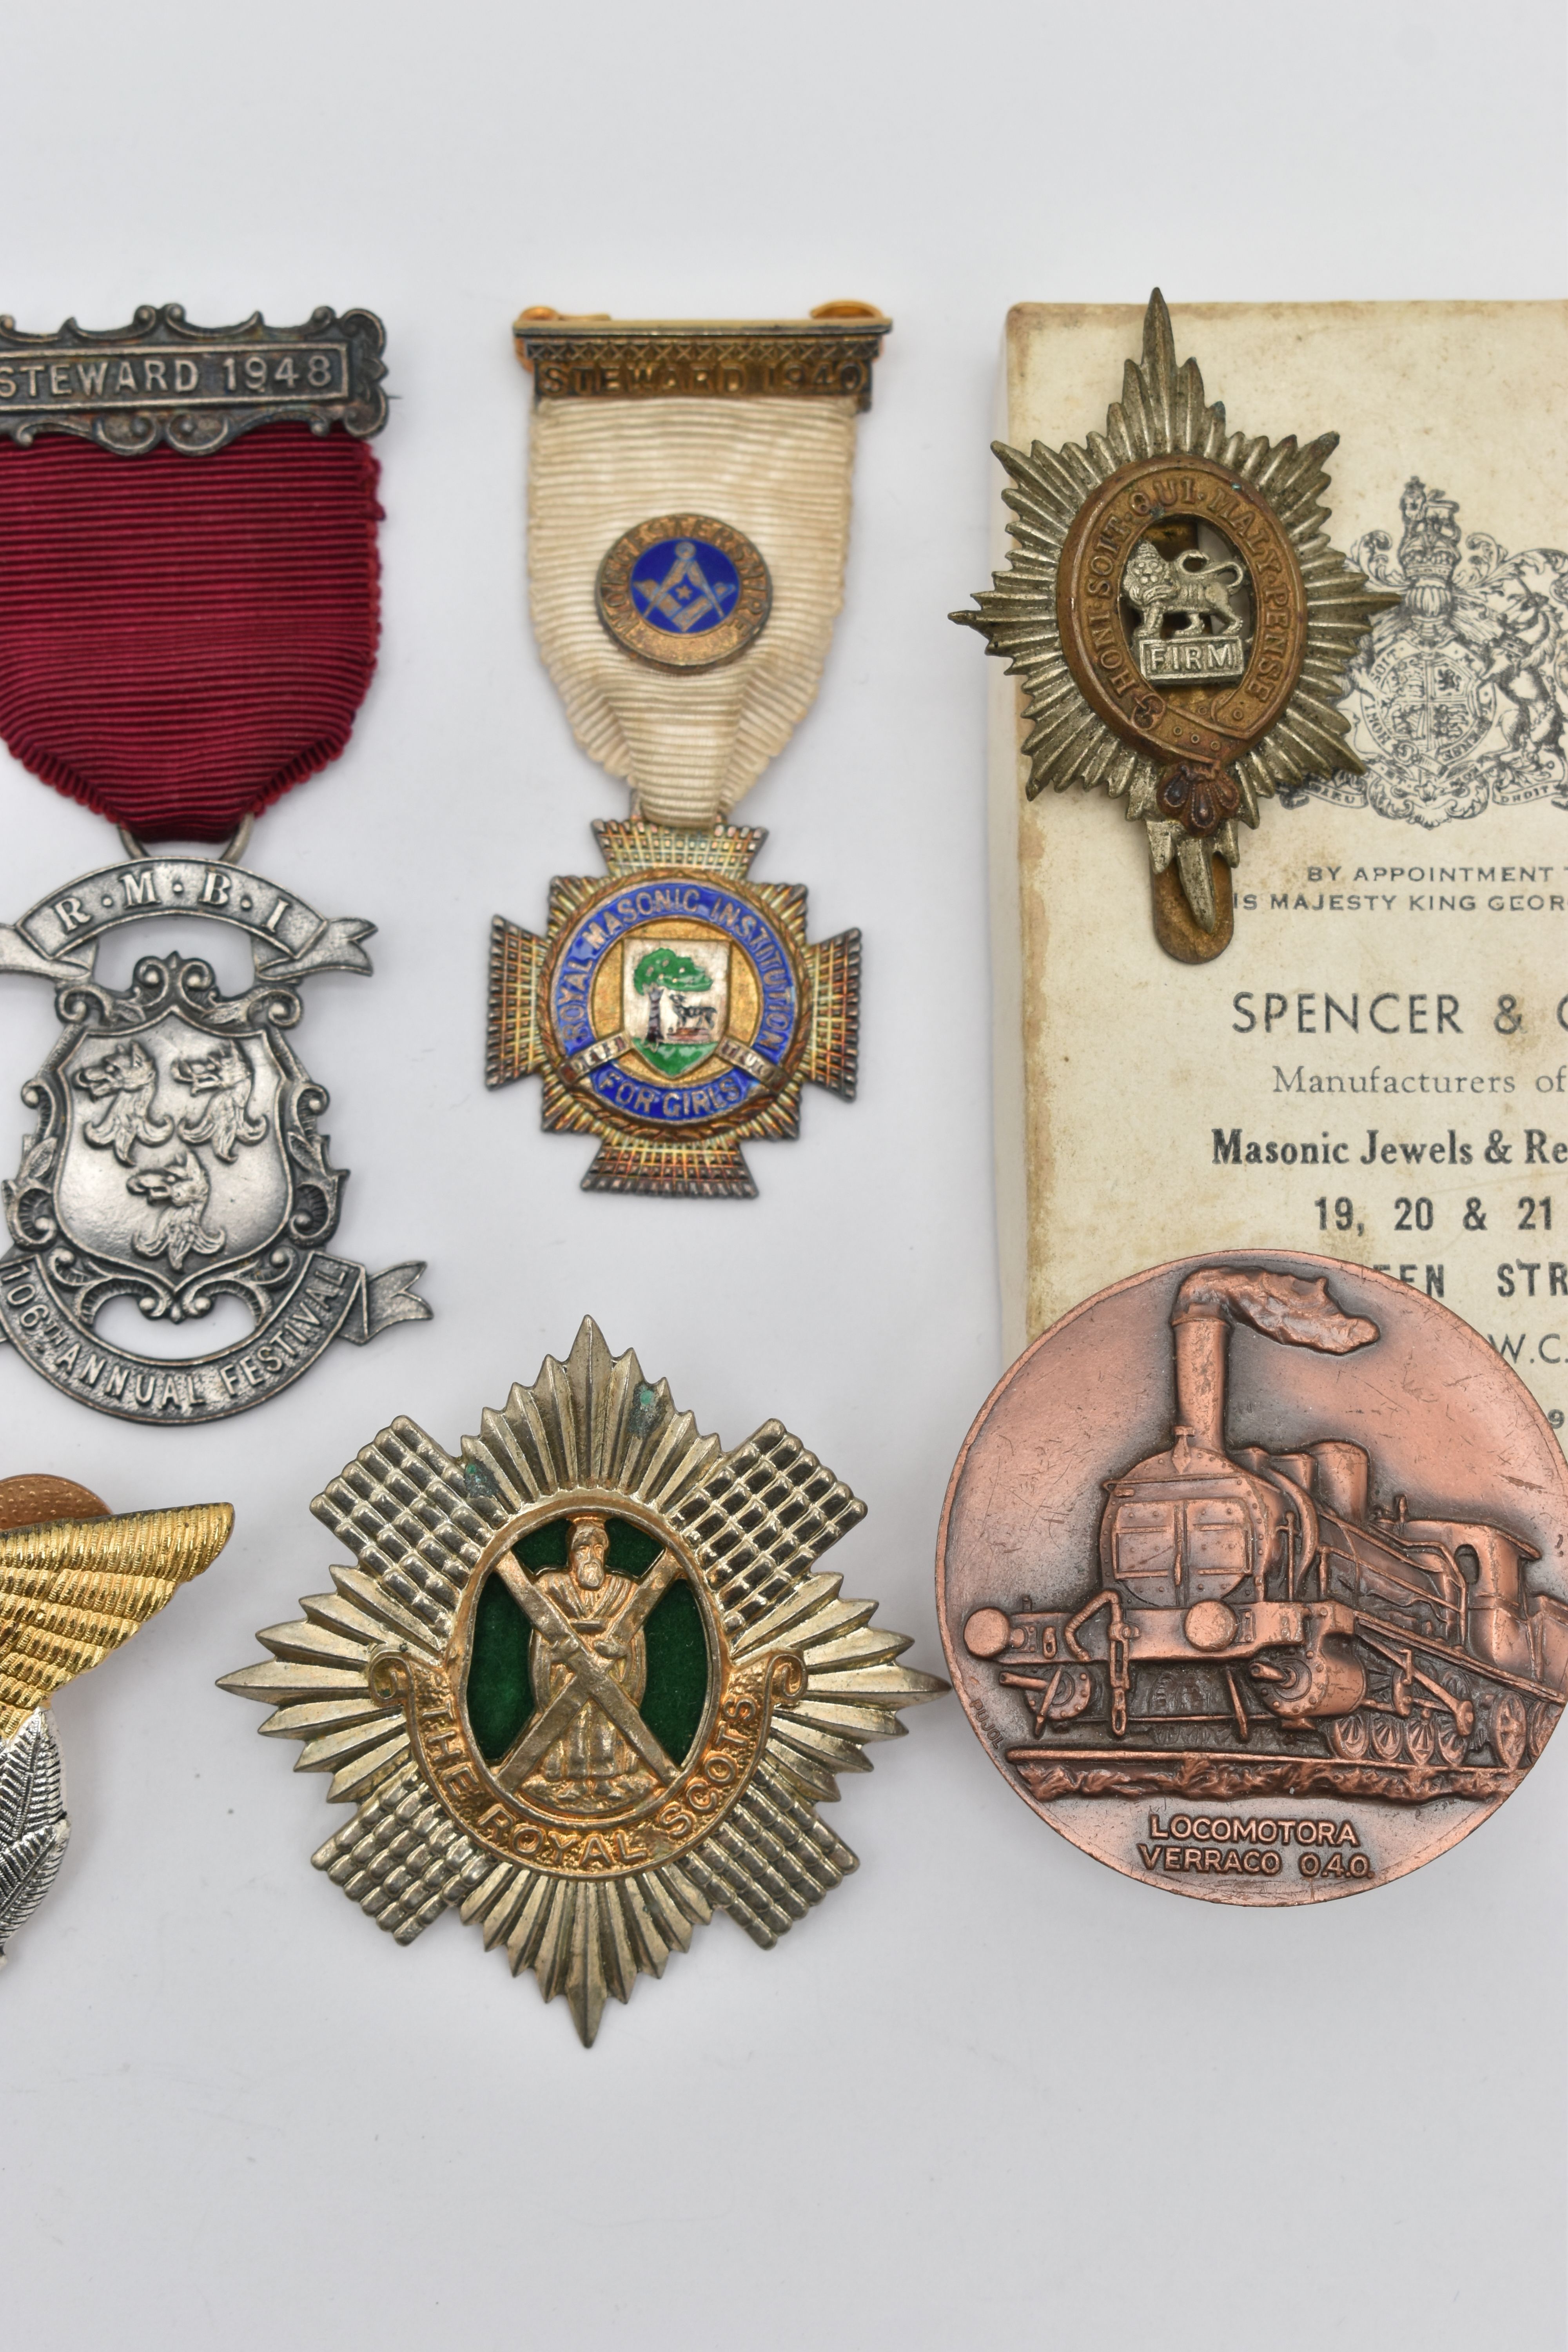 ASSSORTED MEDALS AND A MEDALLION, various medals including Masonic, The Royal Scots, etc some with - Image 3 of 6